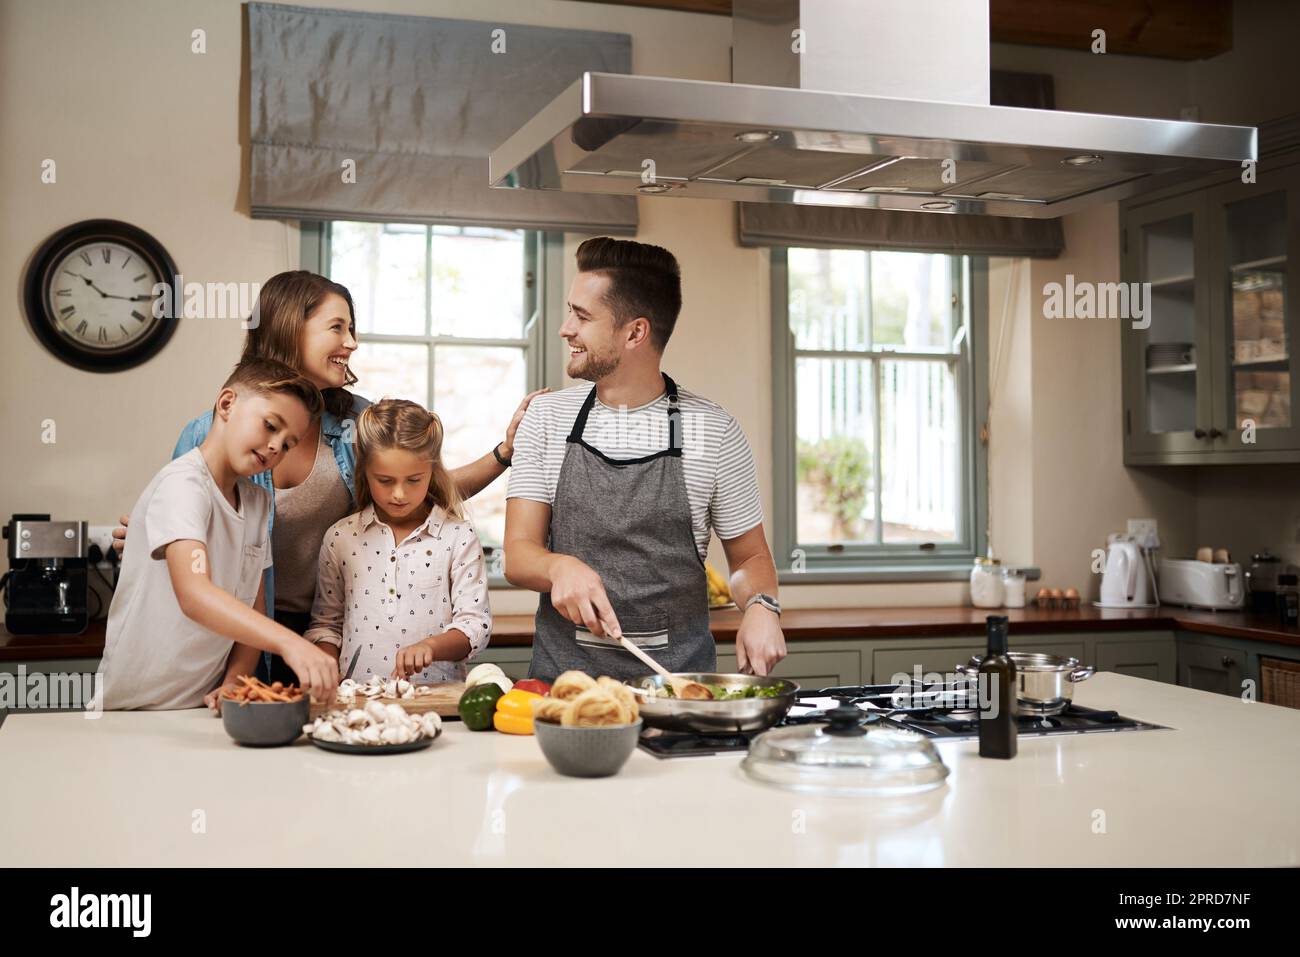 We love weekends because then we get to do everything together. a young family cooking in the kitchen. Stock Photo